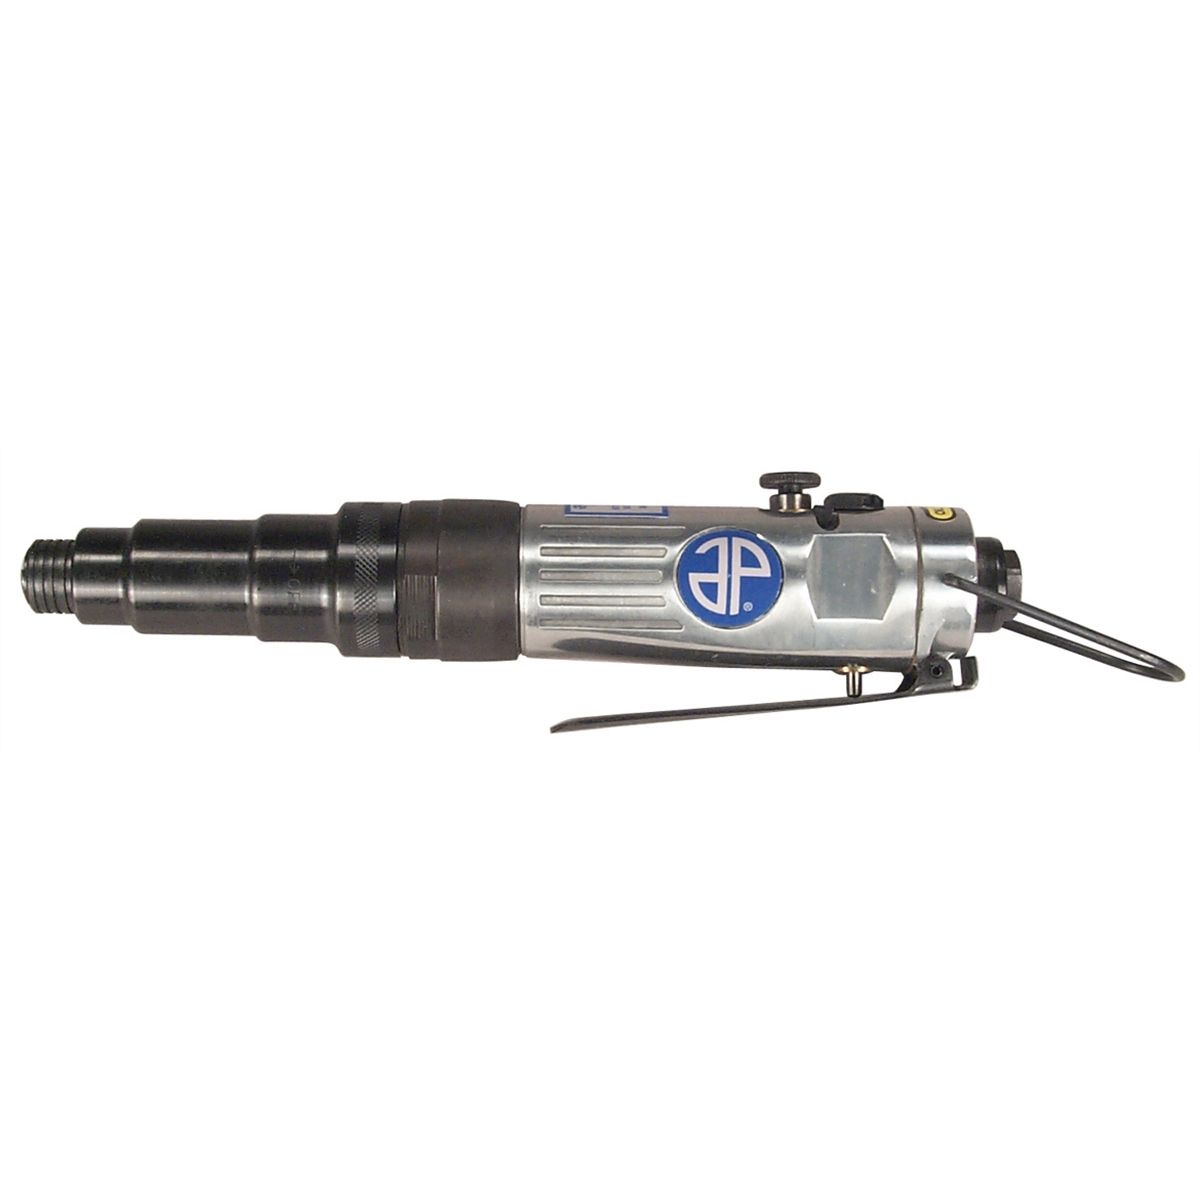 1/4 Inch Drive Straight Type Air Screwdriver - 1800 RPM